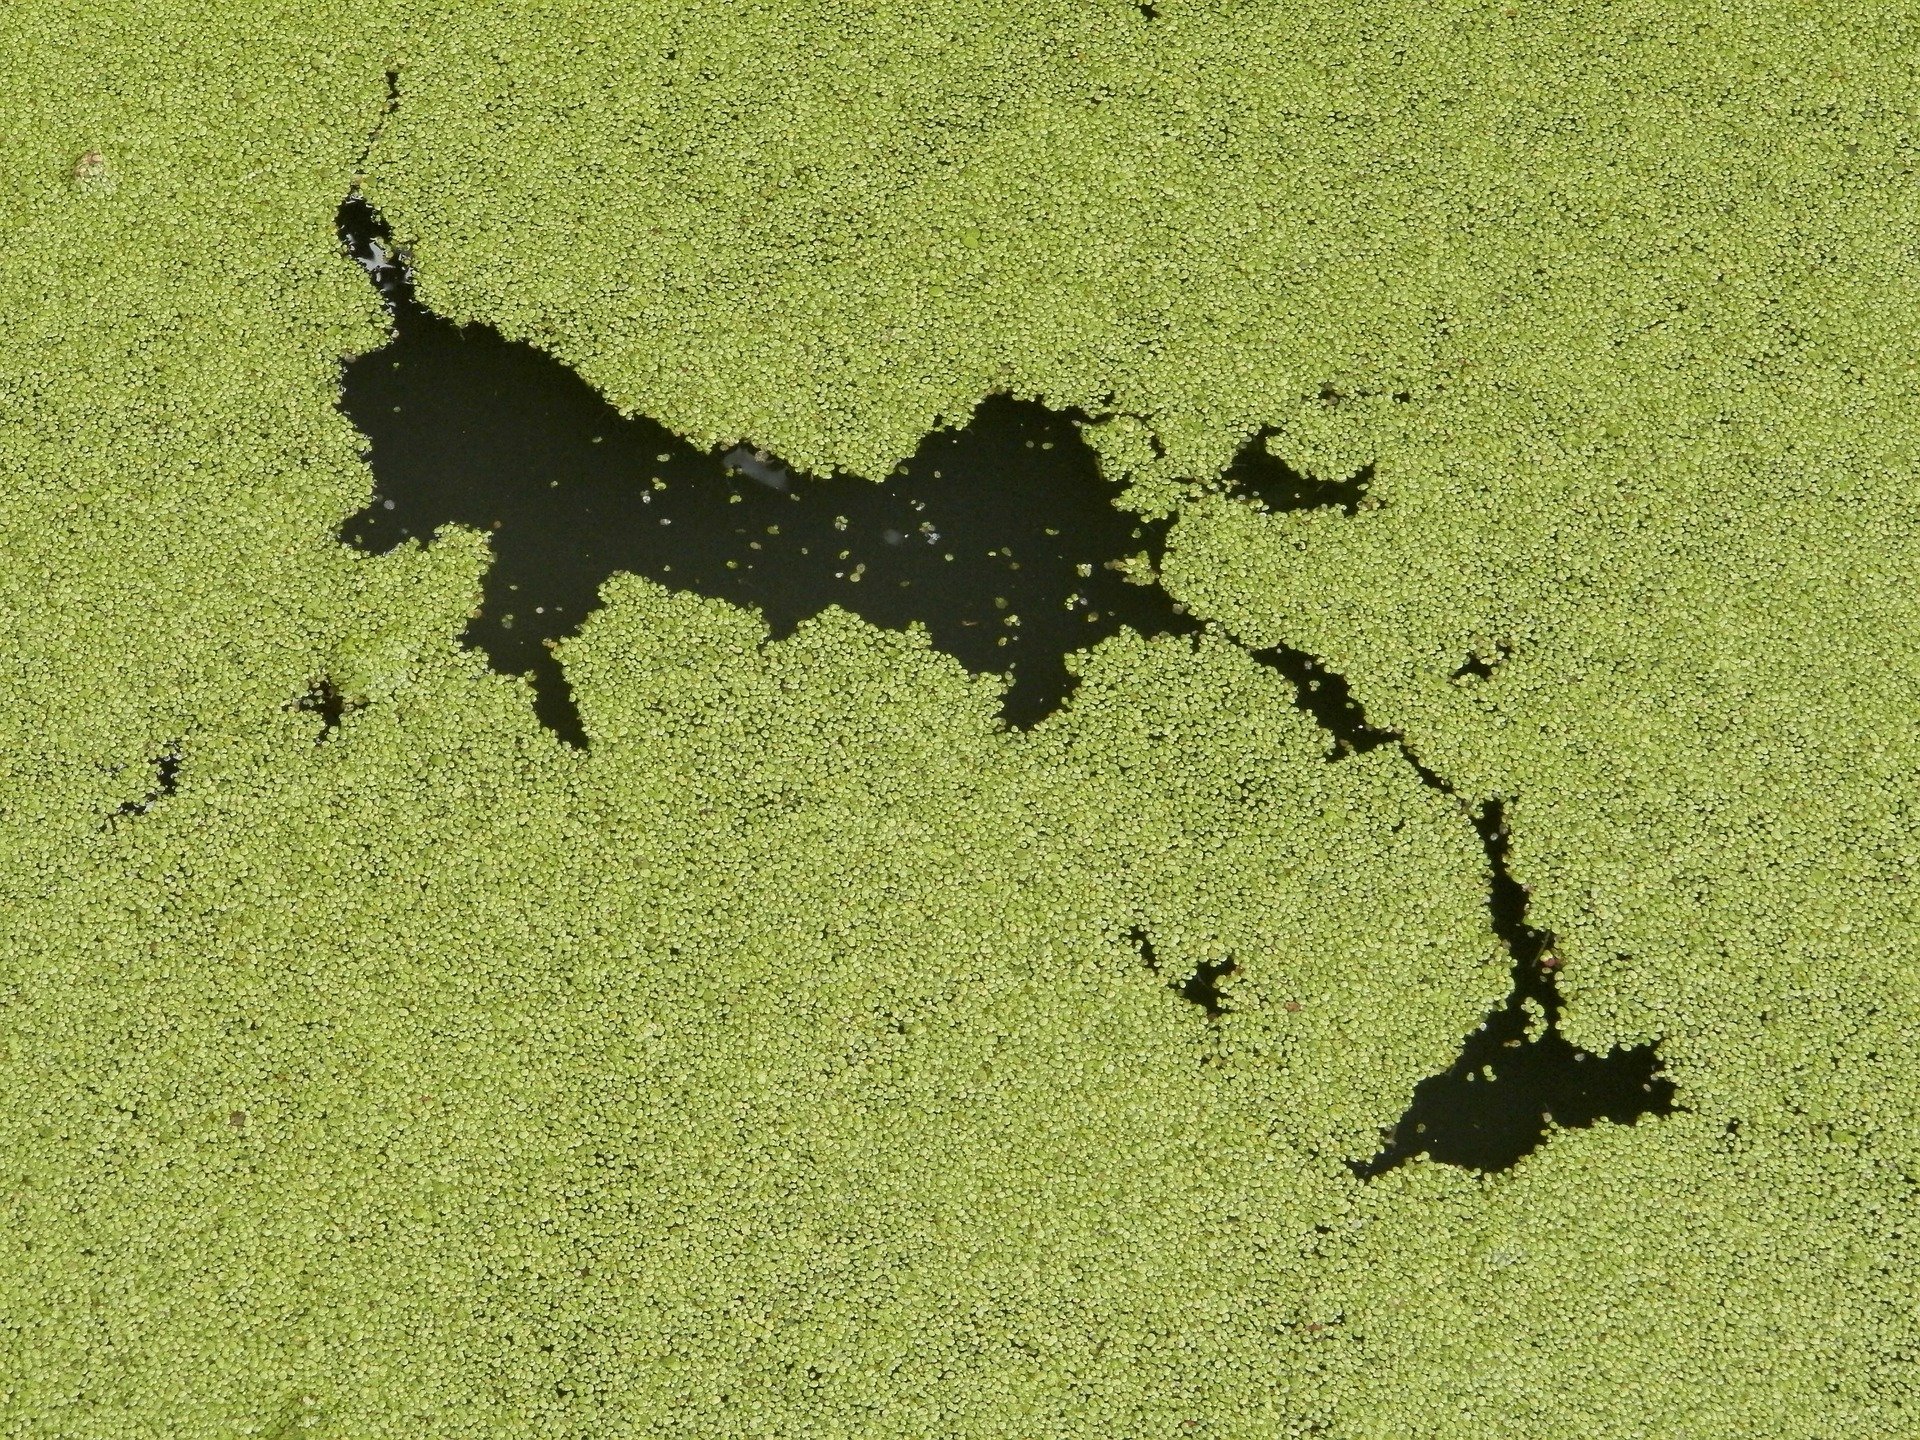 Can trees control algal blooms? - Phys.org